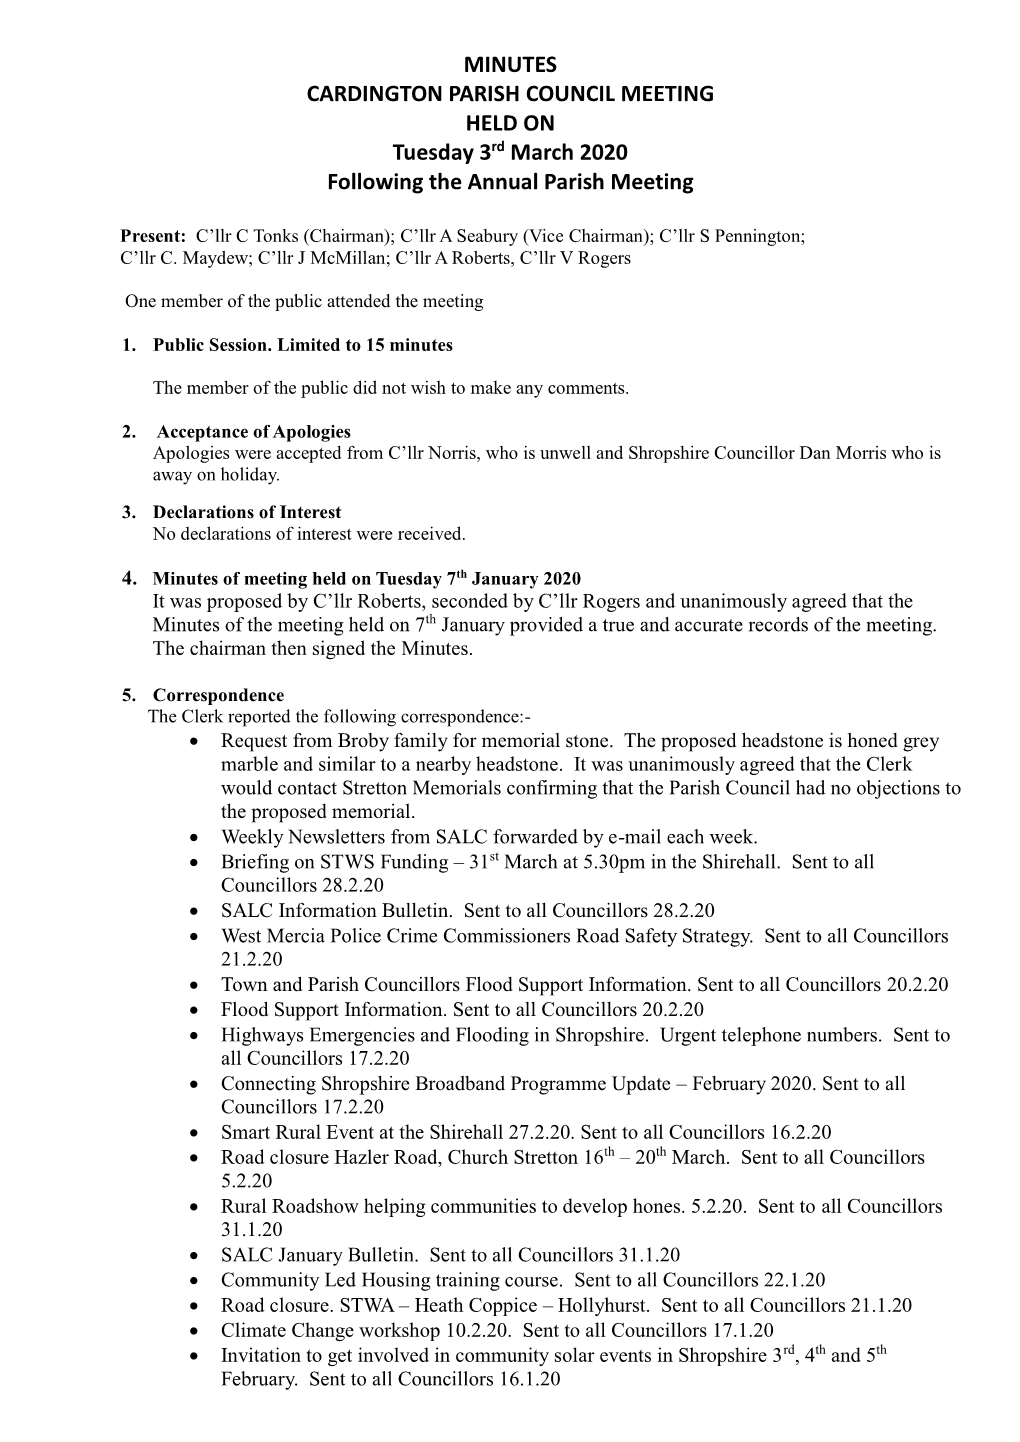 MINUTES CARDINGTON PARISH COUNCIL MEETING HELD on Tuesday 3Rd March 2020 Following the Annual Parish Meeting